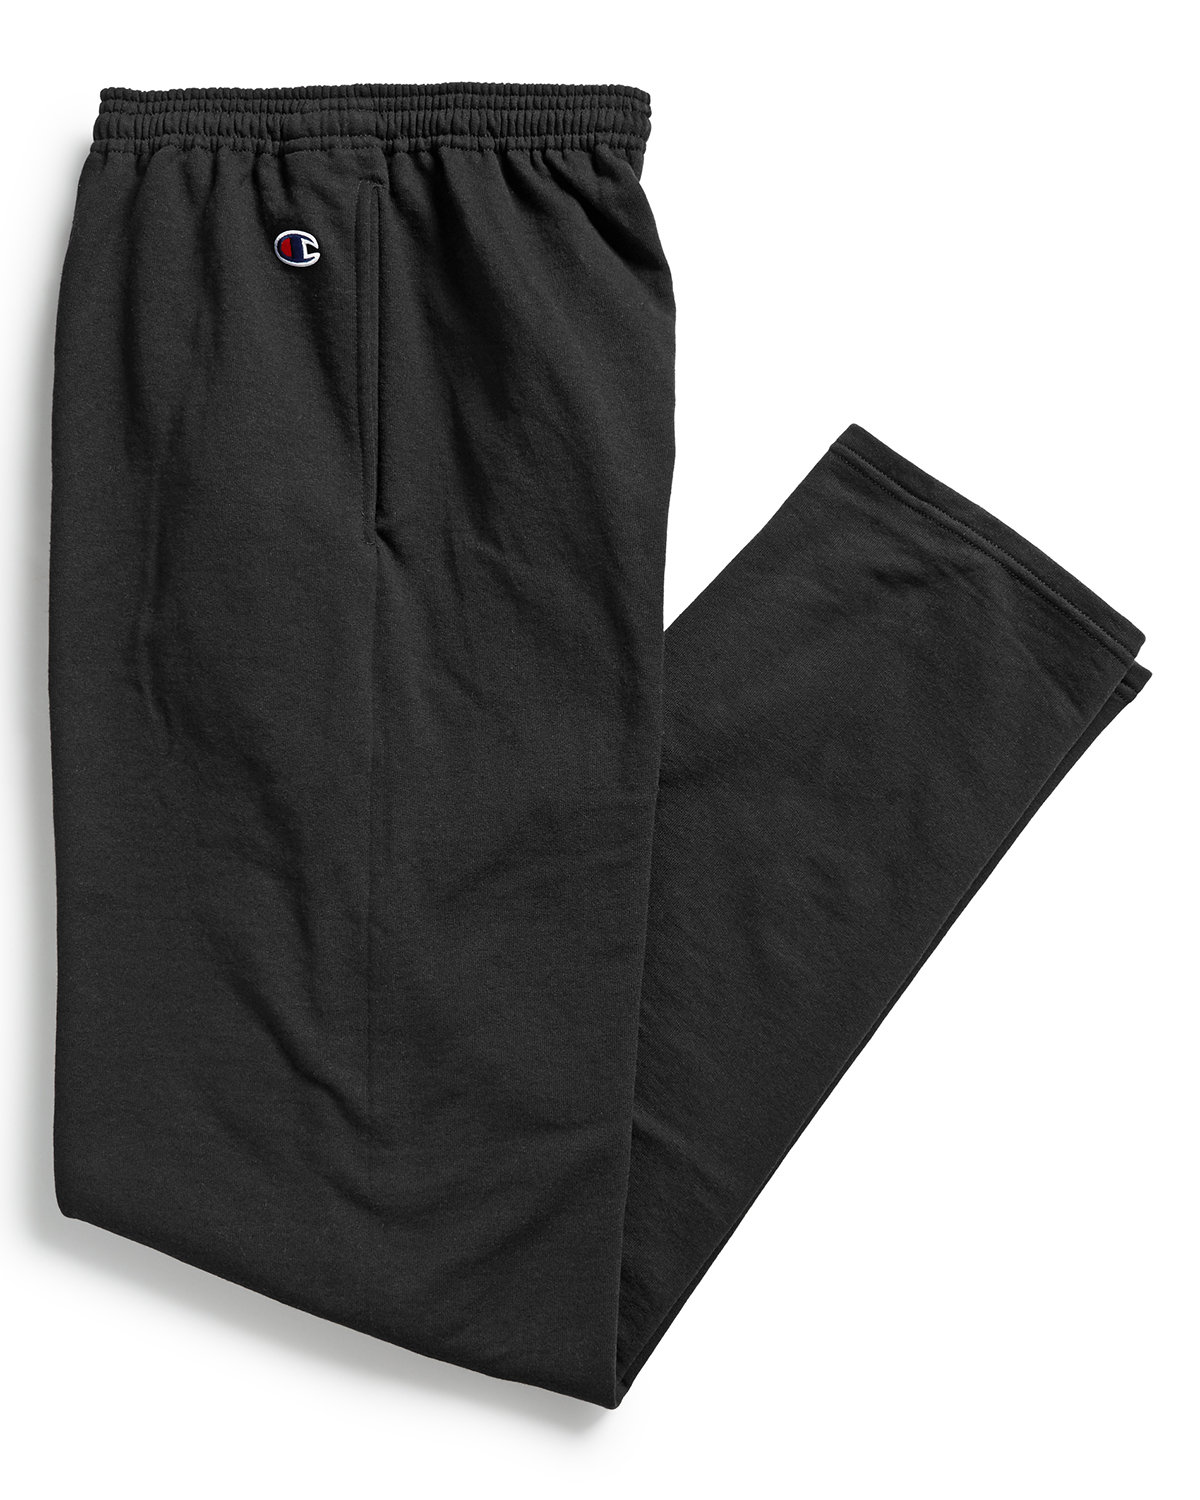 Champion Adult Powerblend® Open Bottom Fleece Pant With Pockets